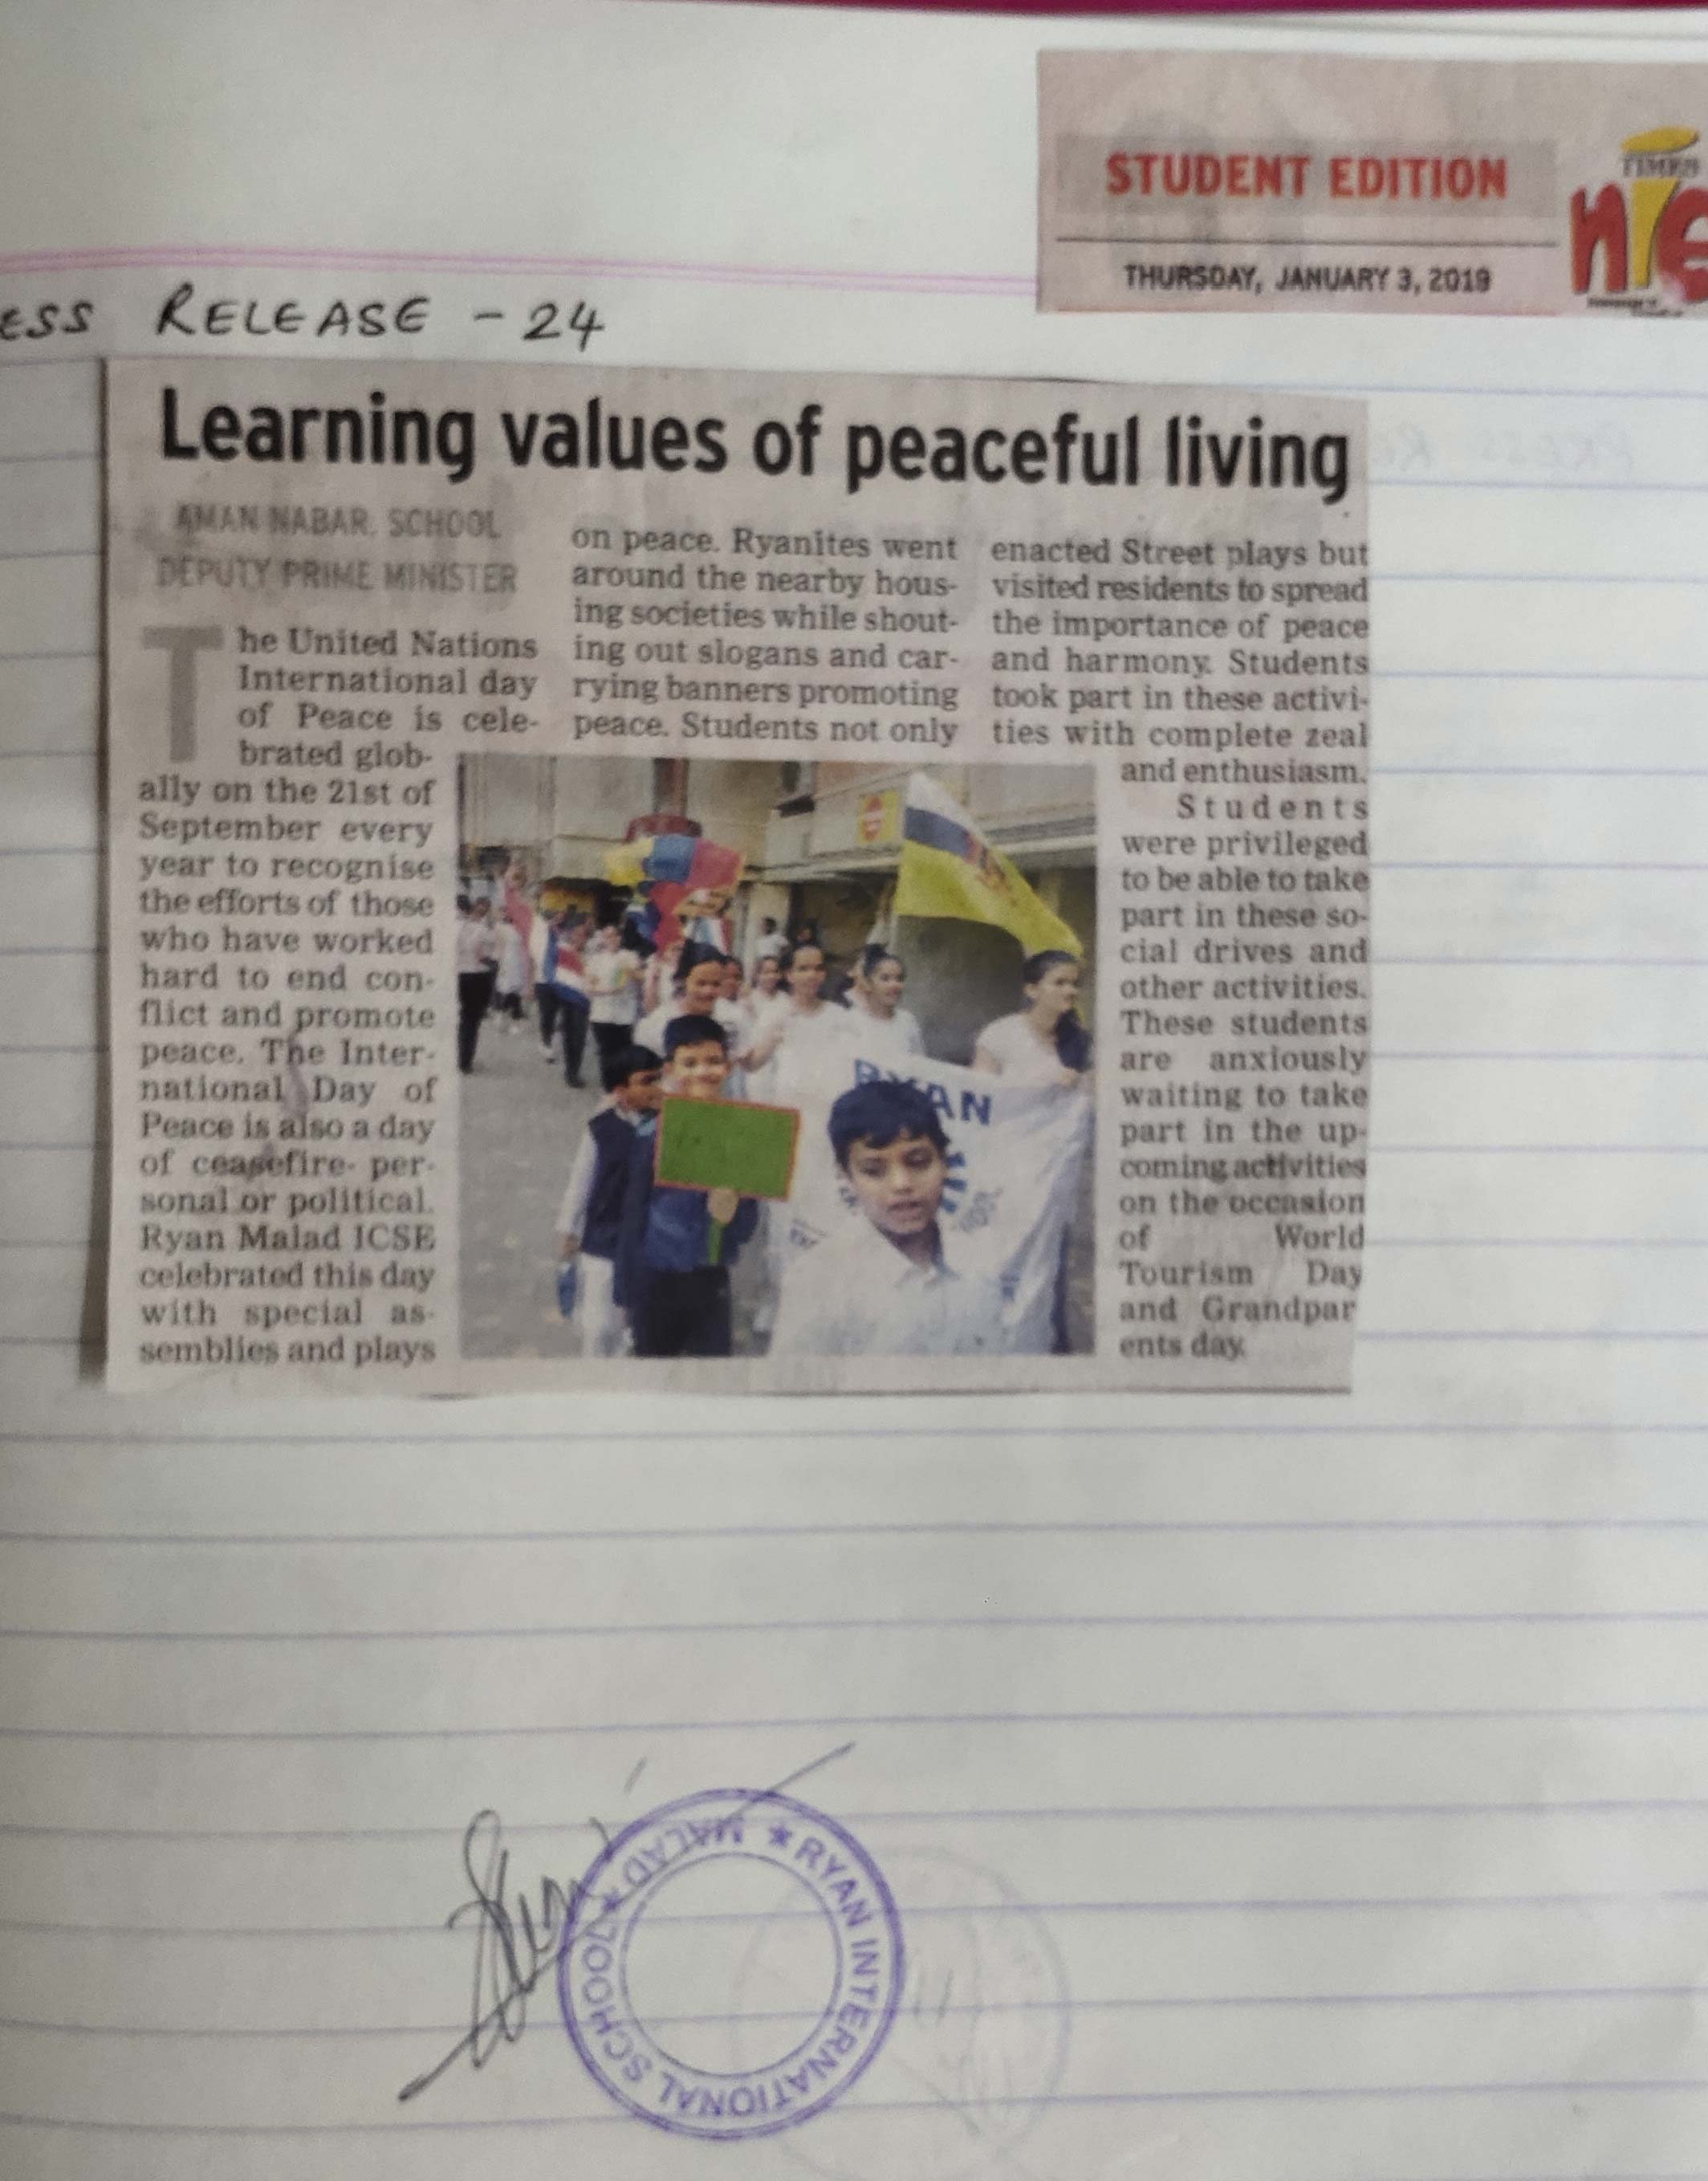 A student article was published in the Times of India